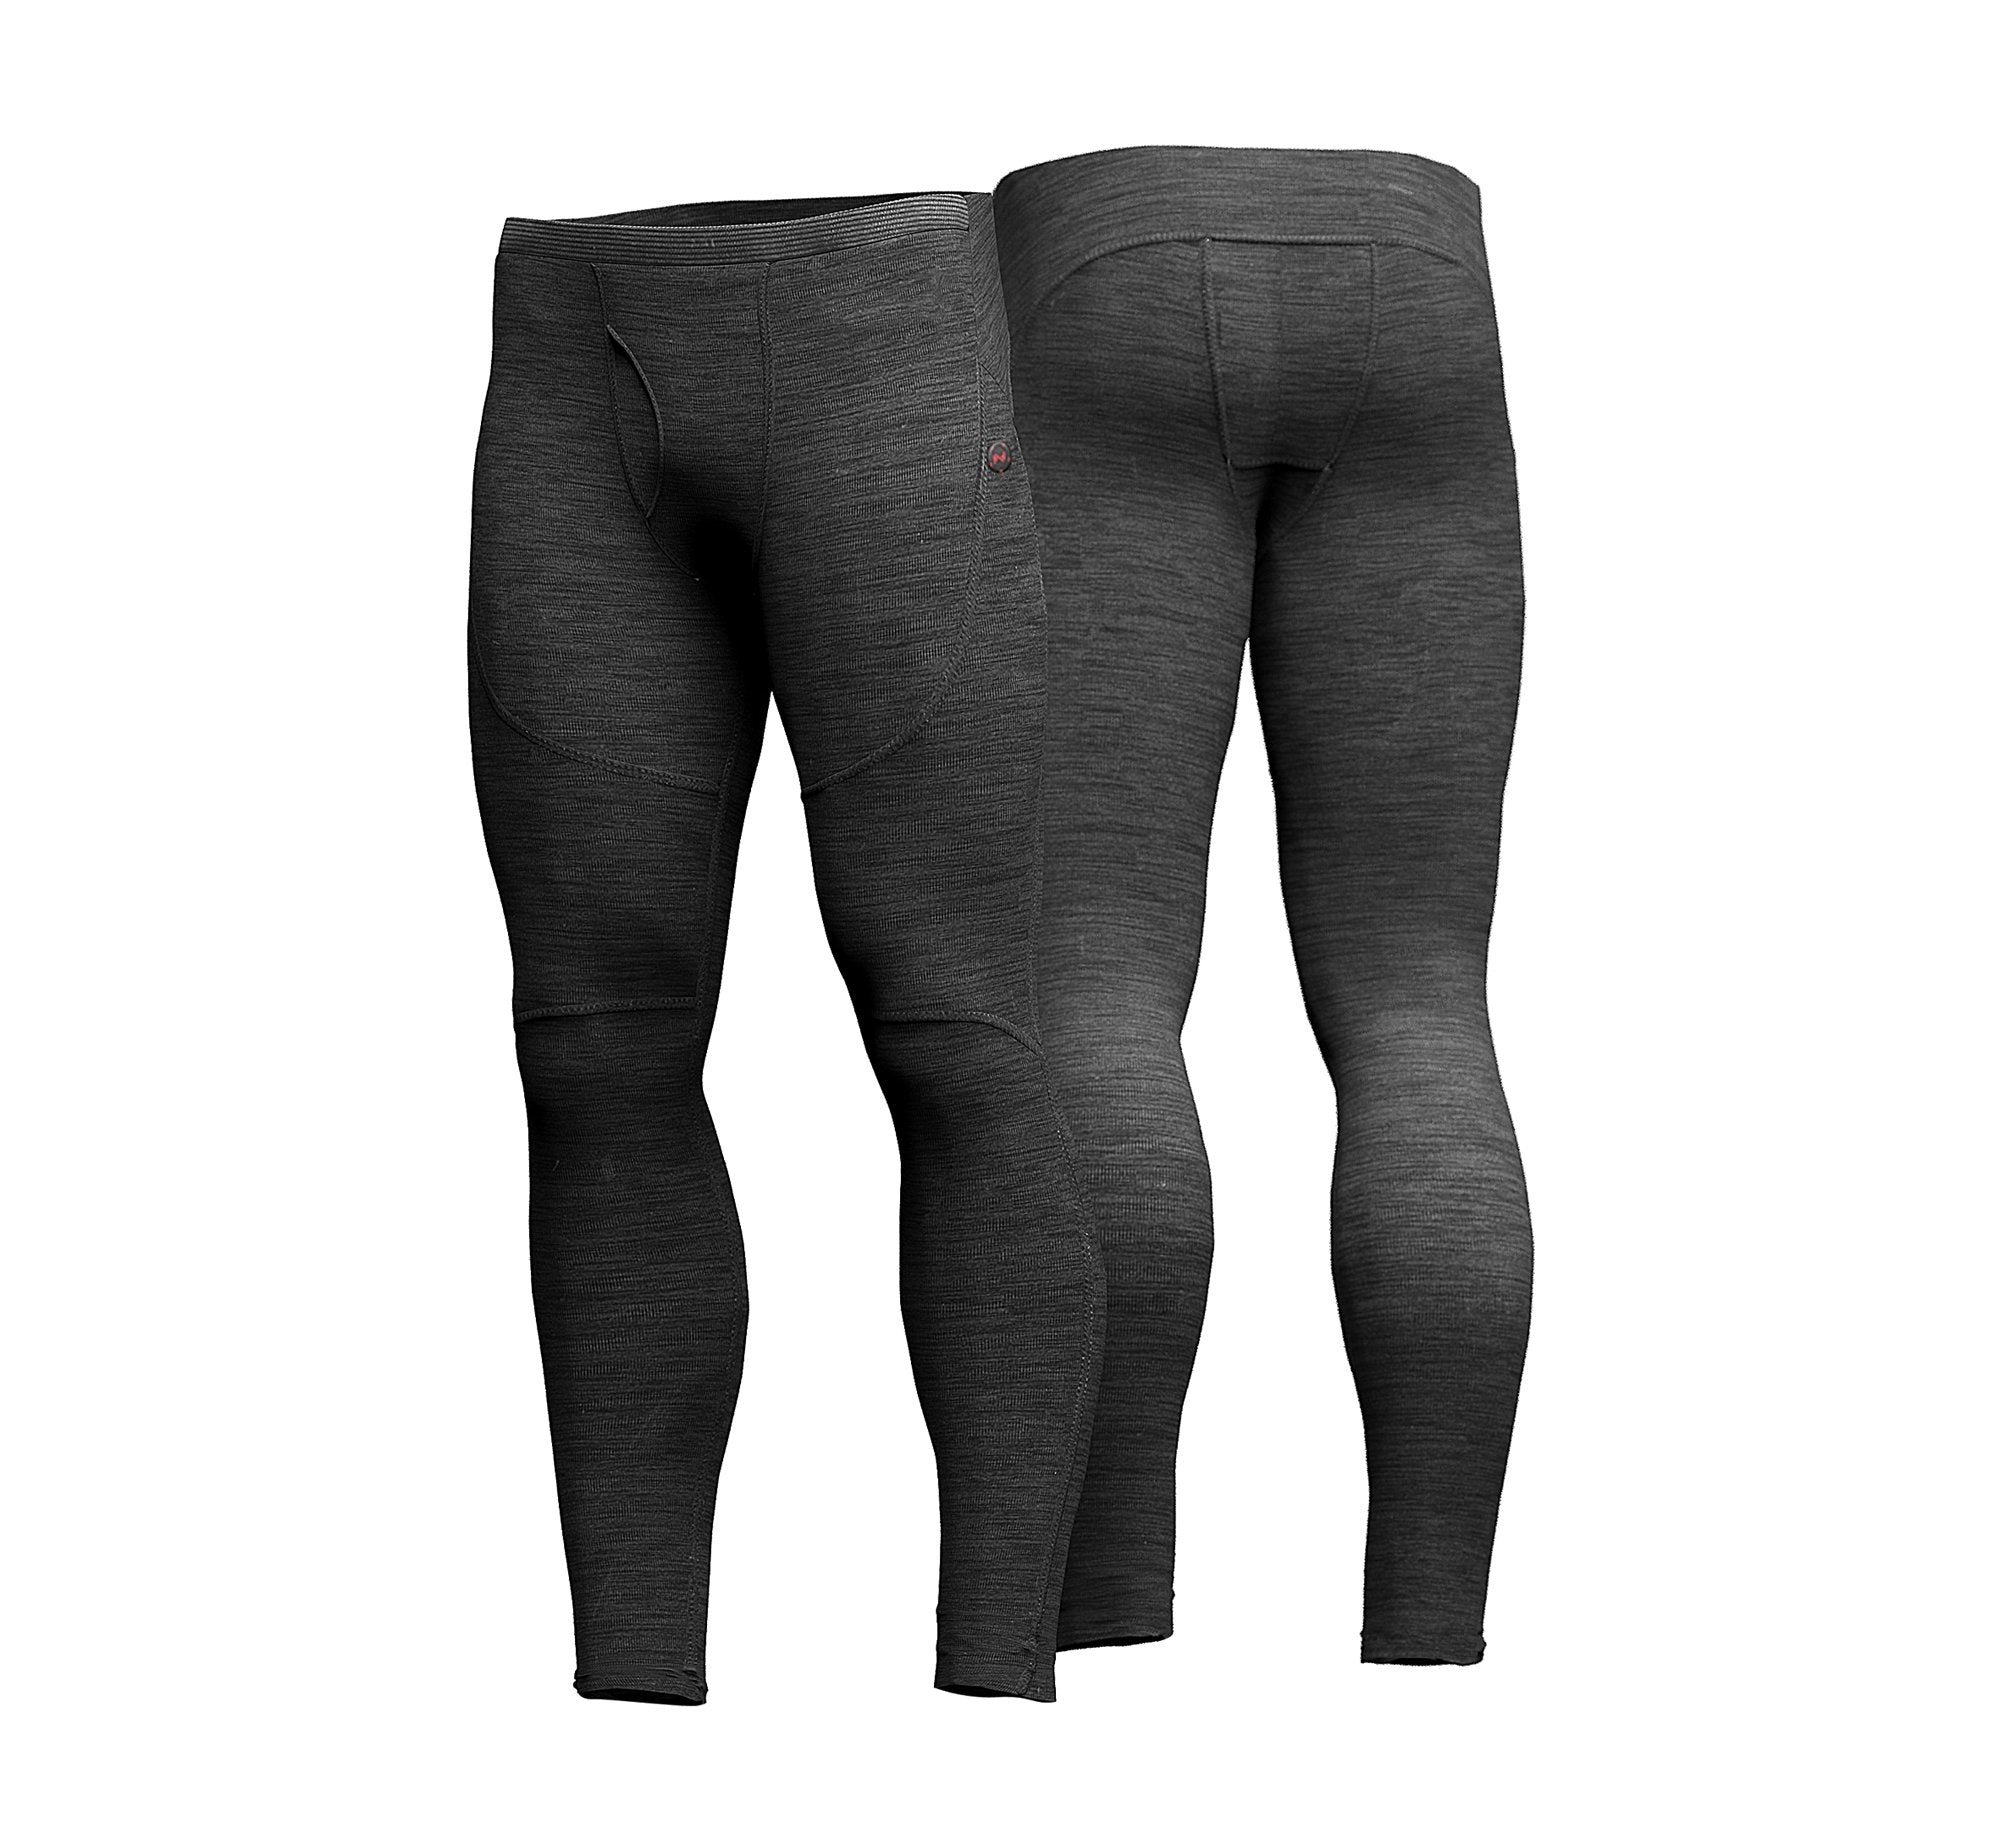 Heated Pants,USB Electric Thermal Heating Trousers,Washable USB